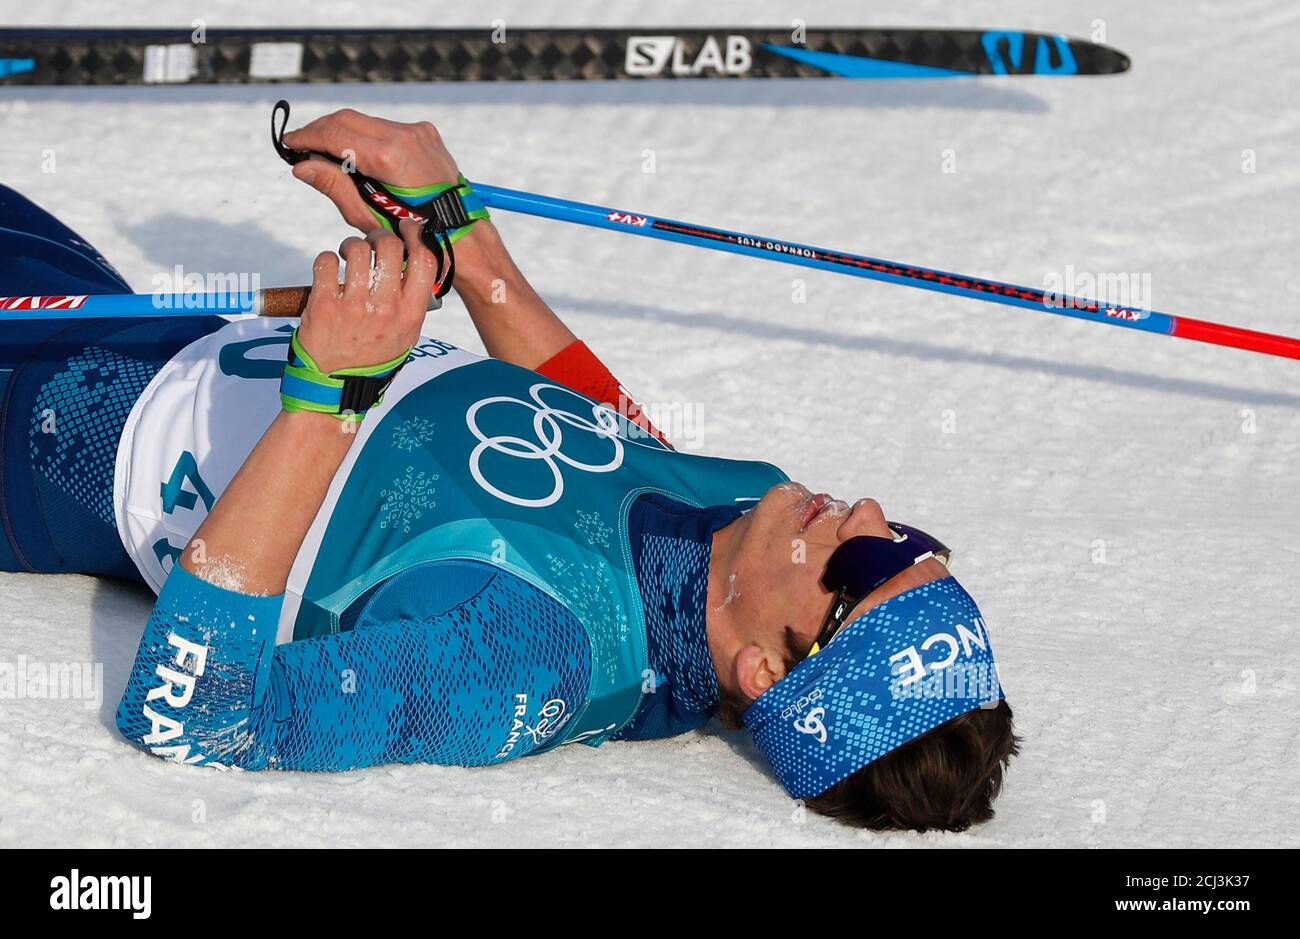 Cross-Country Skiing – Pyeongchang 2018 Winter Olympics – Men's 15km Free – Alpensia Cross-Country Skiing Centre – Pyeongchang, South Korea – February 16, 2018 - Clement Parisse of France reacts after crossing the finish line. REUTERS/Murad Sezer Stock Photo